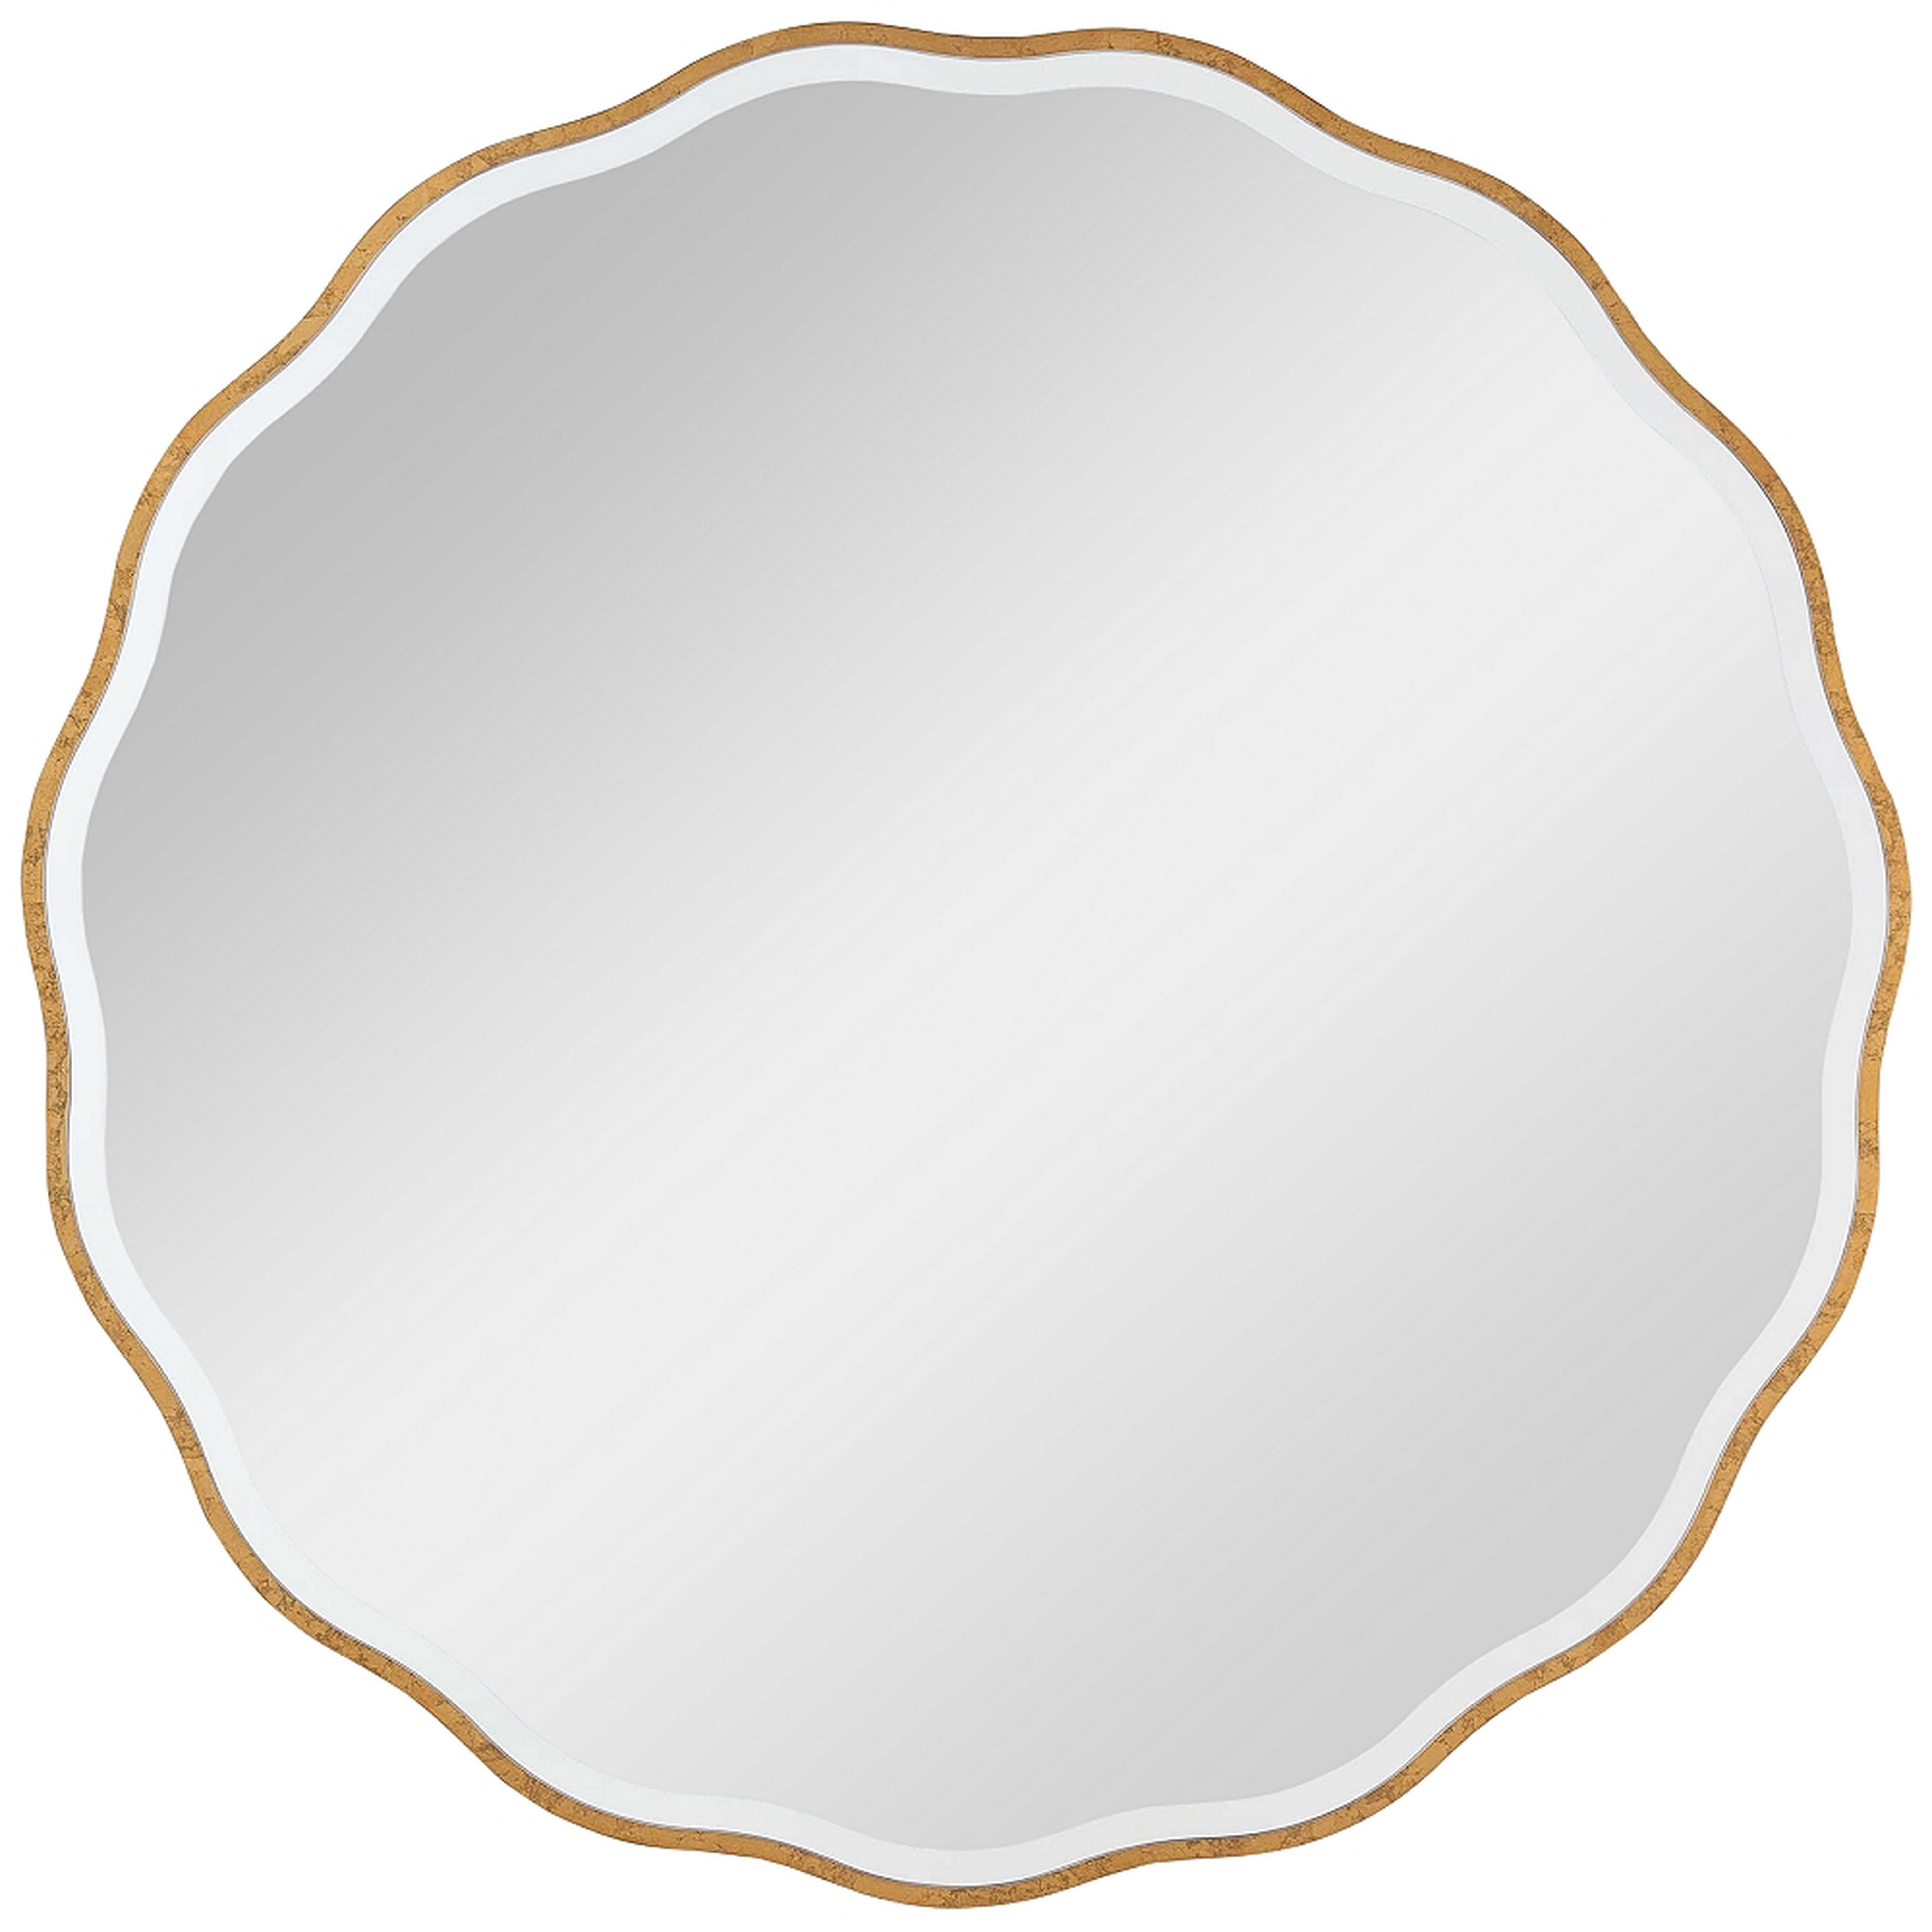 Candice Gold Leaf 42" Round Oversized Wall Mirror - Style # 96K92 - Lamps Plus